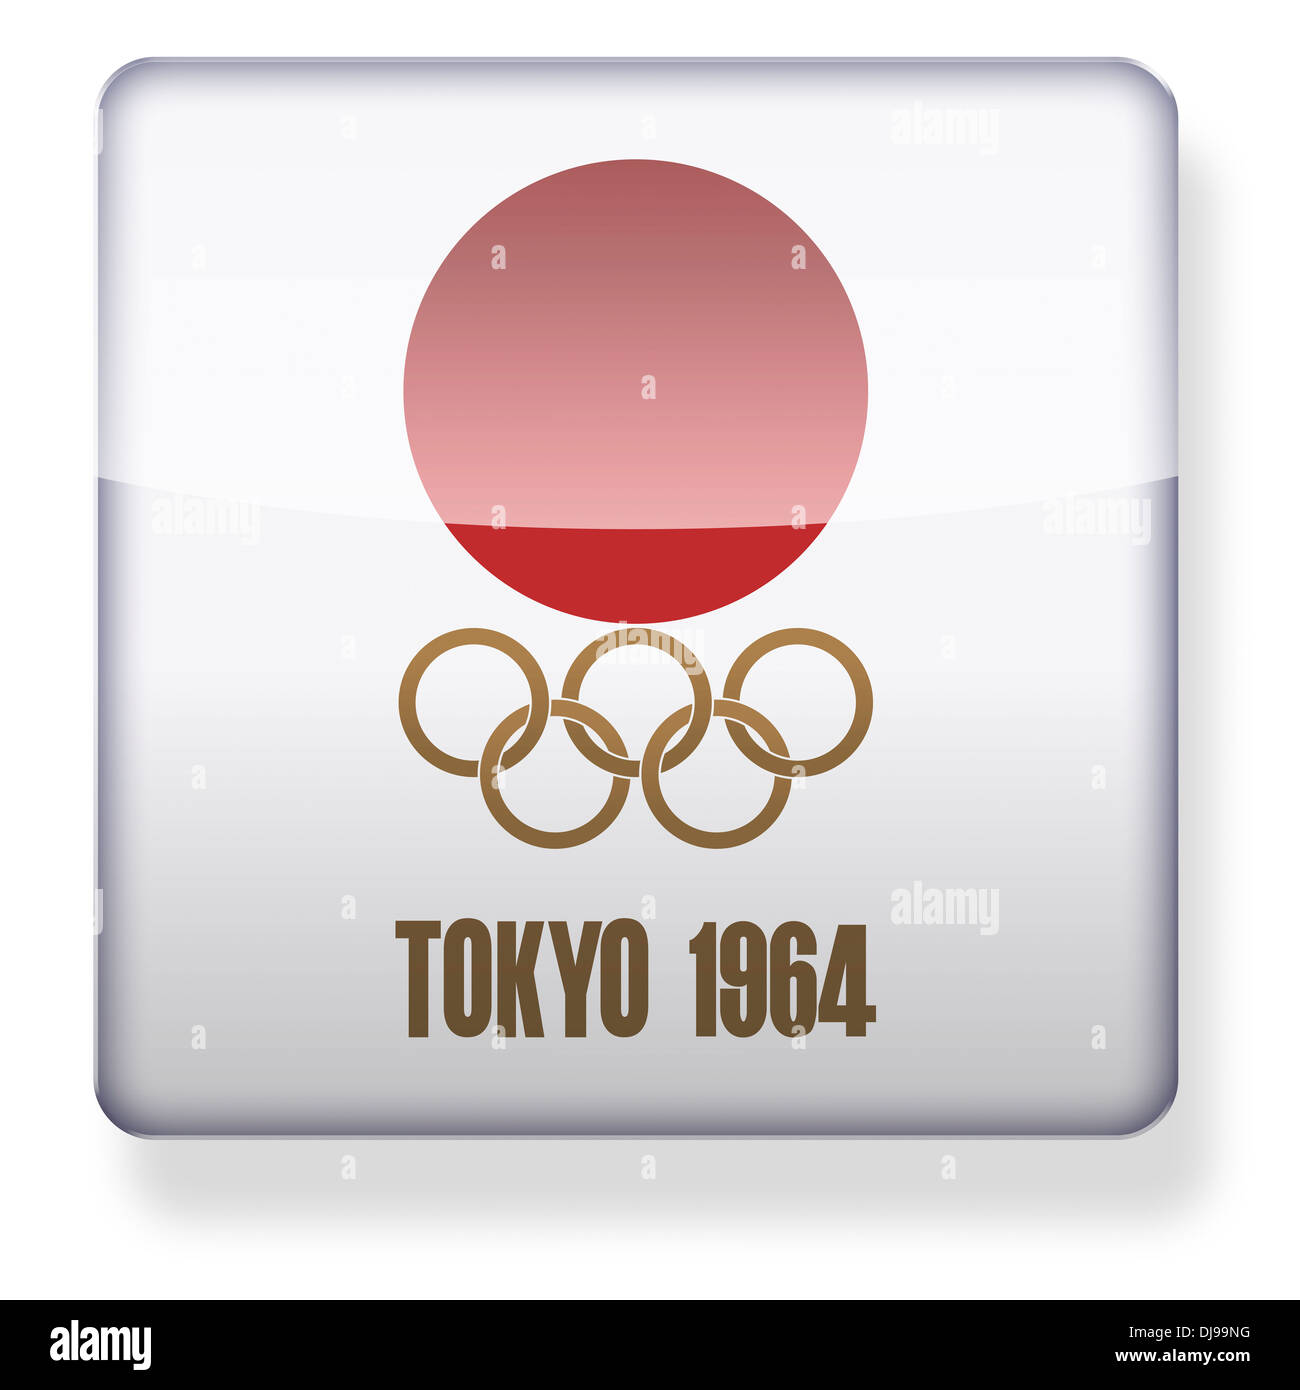 Tokyo 1964 Olympics logo as an app icon. Clipping path included. Stock Photo